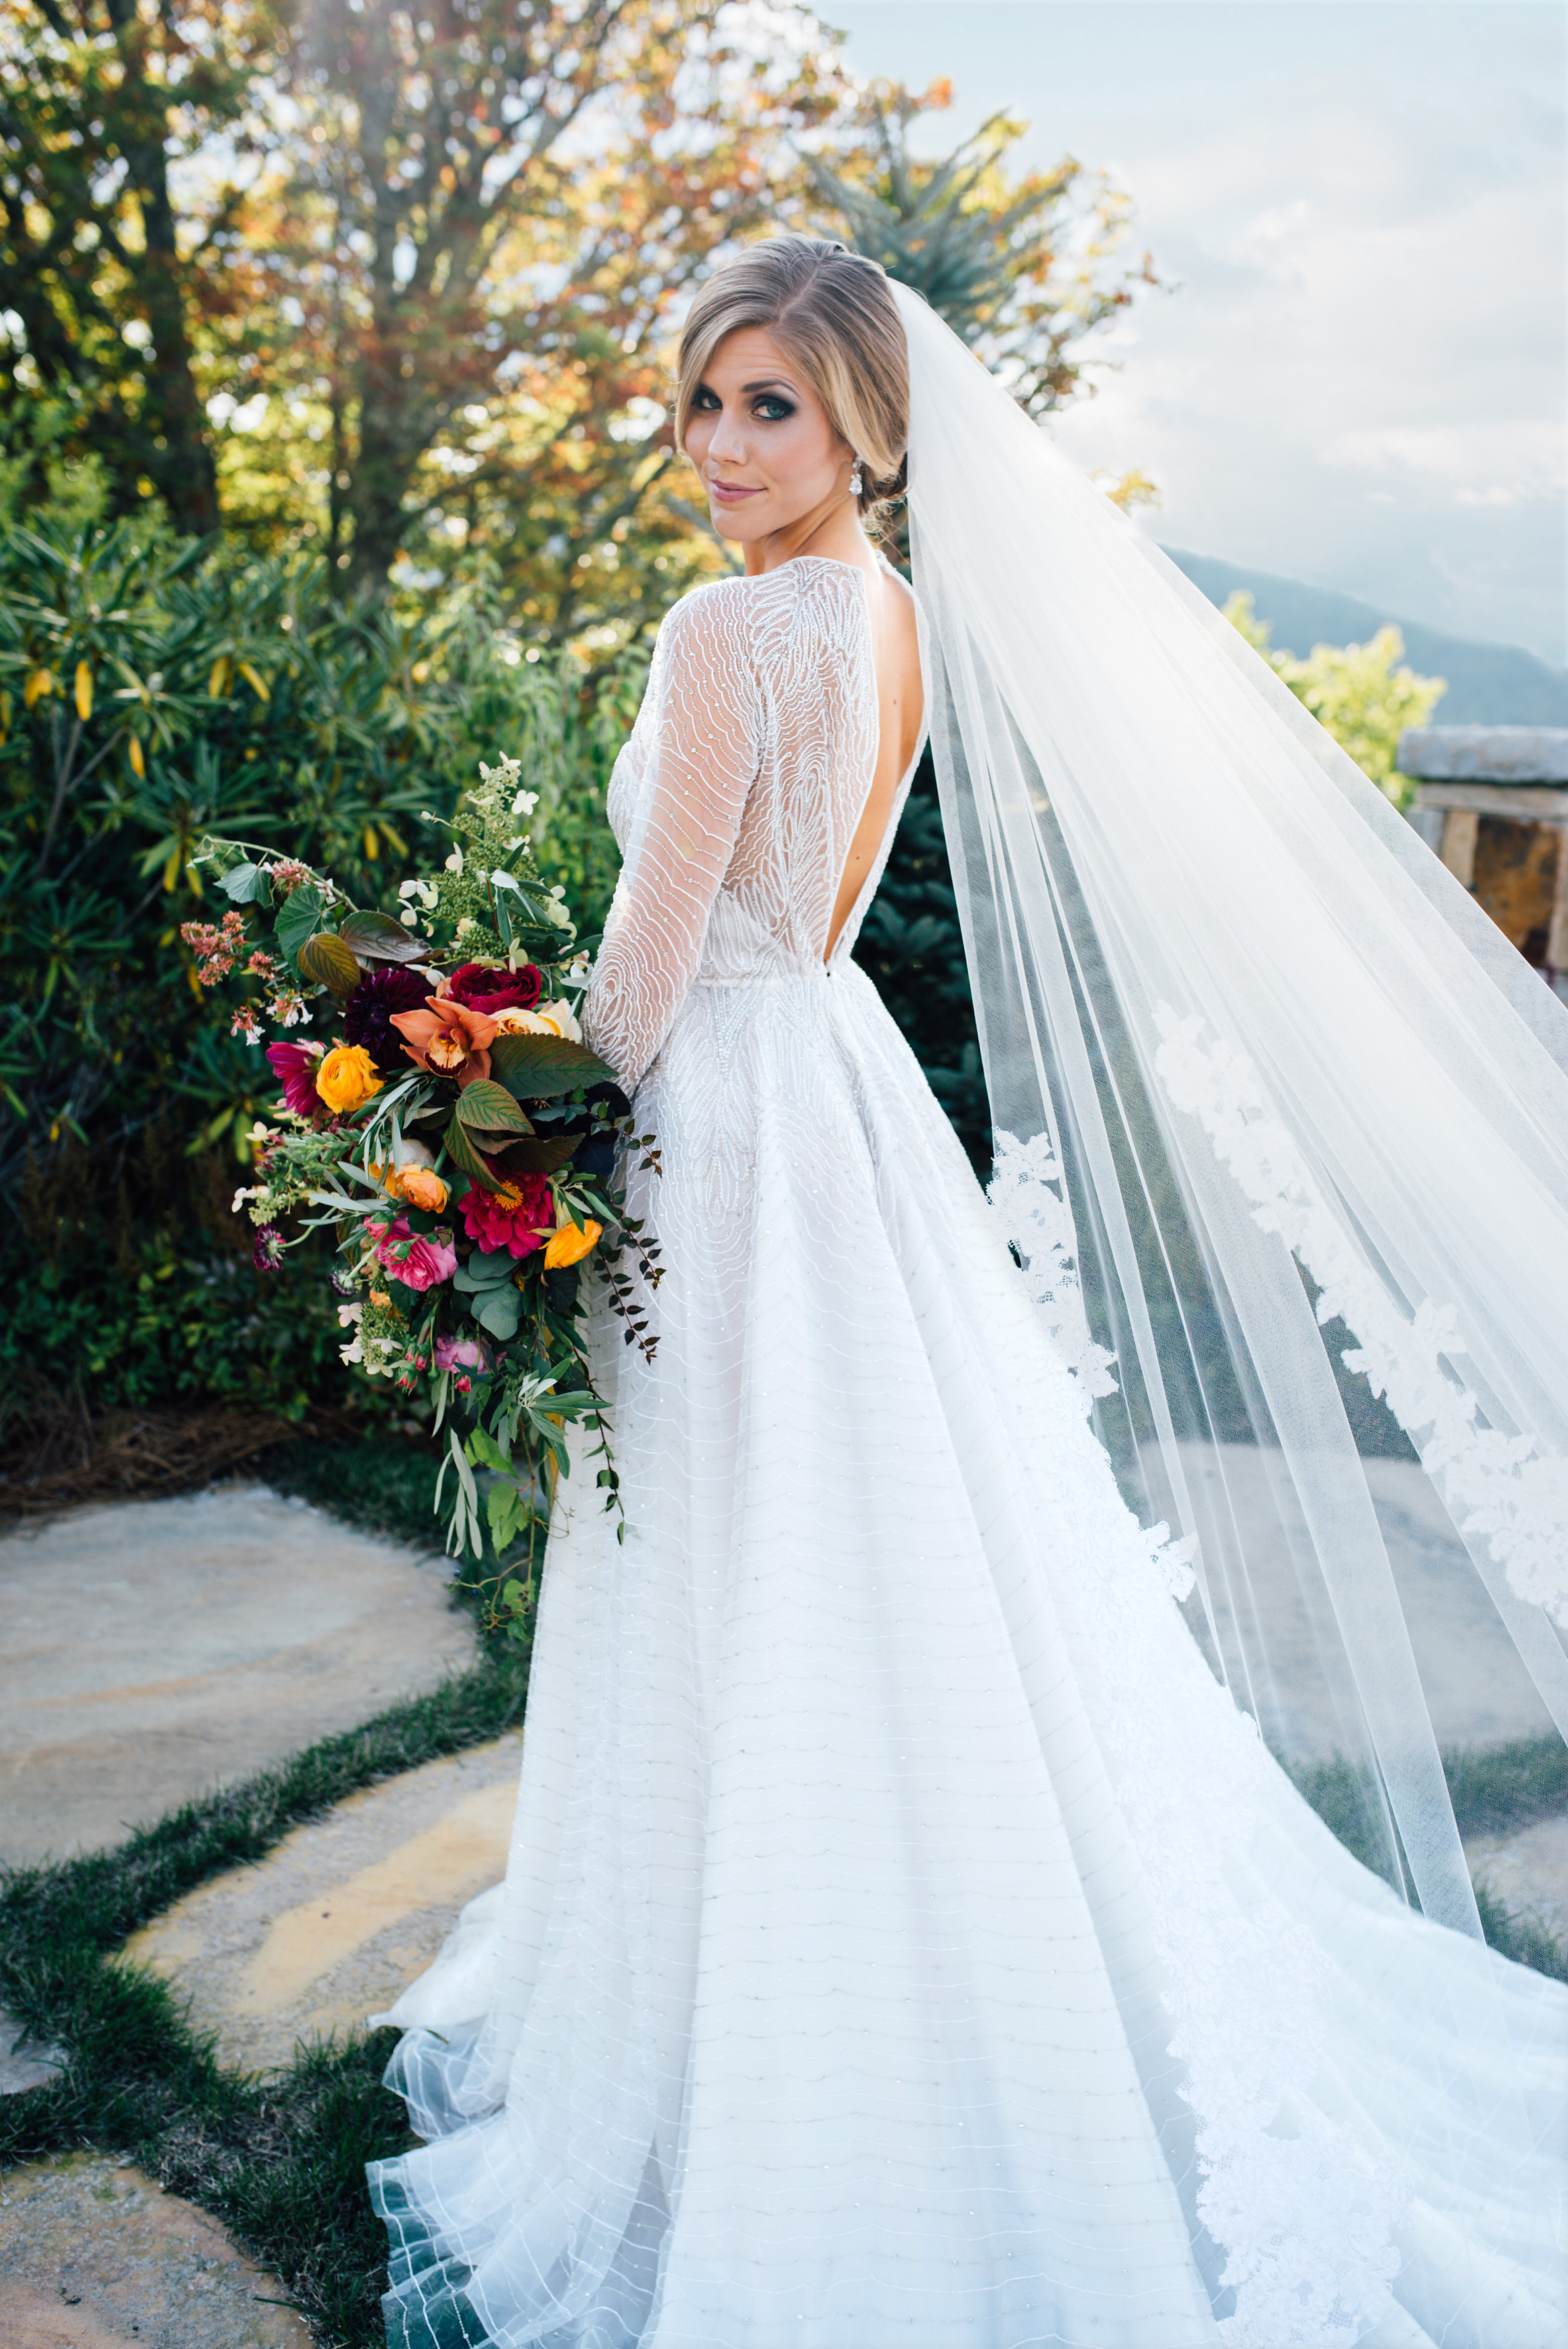  Game of Thrones Editorial Shoot by Whiskey &amp; White Events. At the Old Edwards Inn in Highlands, NC.&nbsp;  Photo by Cameron Reynolds Photography  Design &amp; Styling by Whiskey &amp; White Events  Models are Austin Boatwright&nbsp;  Brides Dres